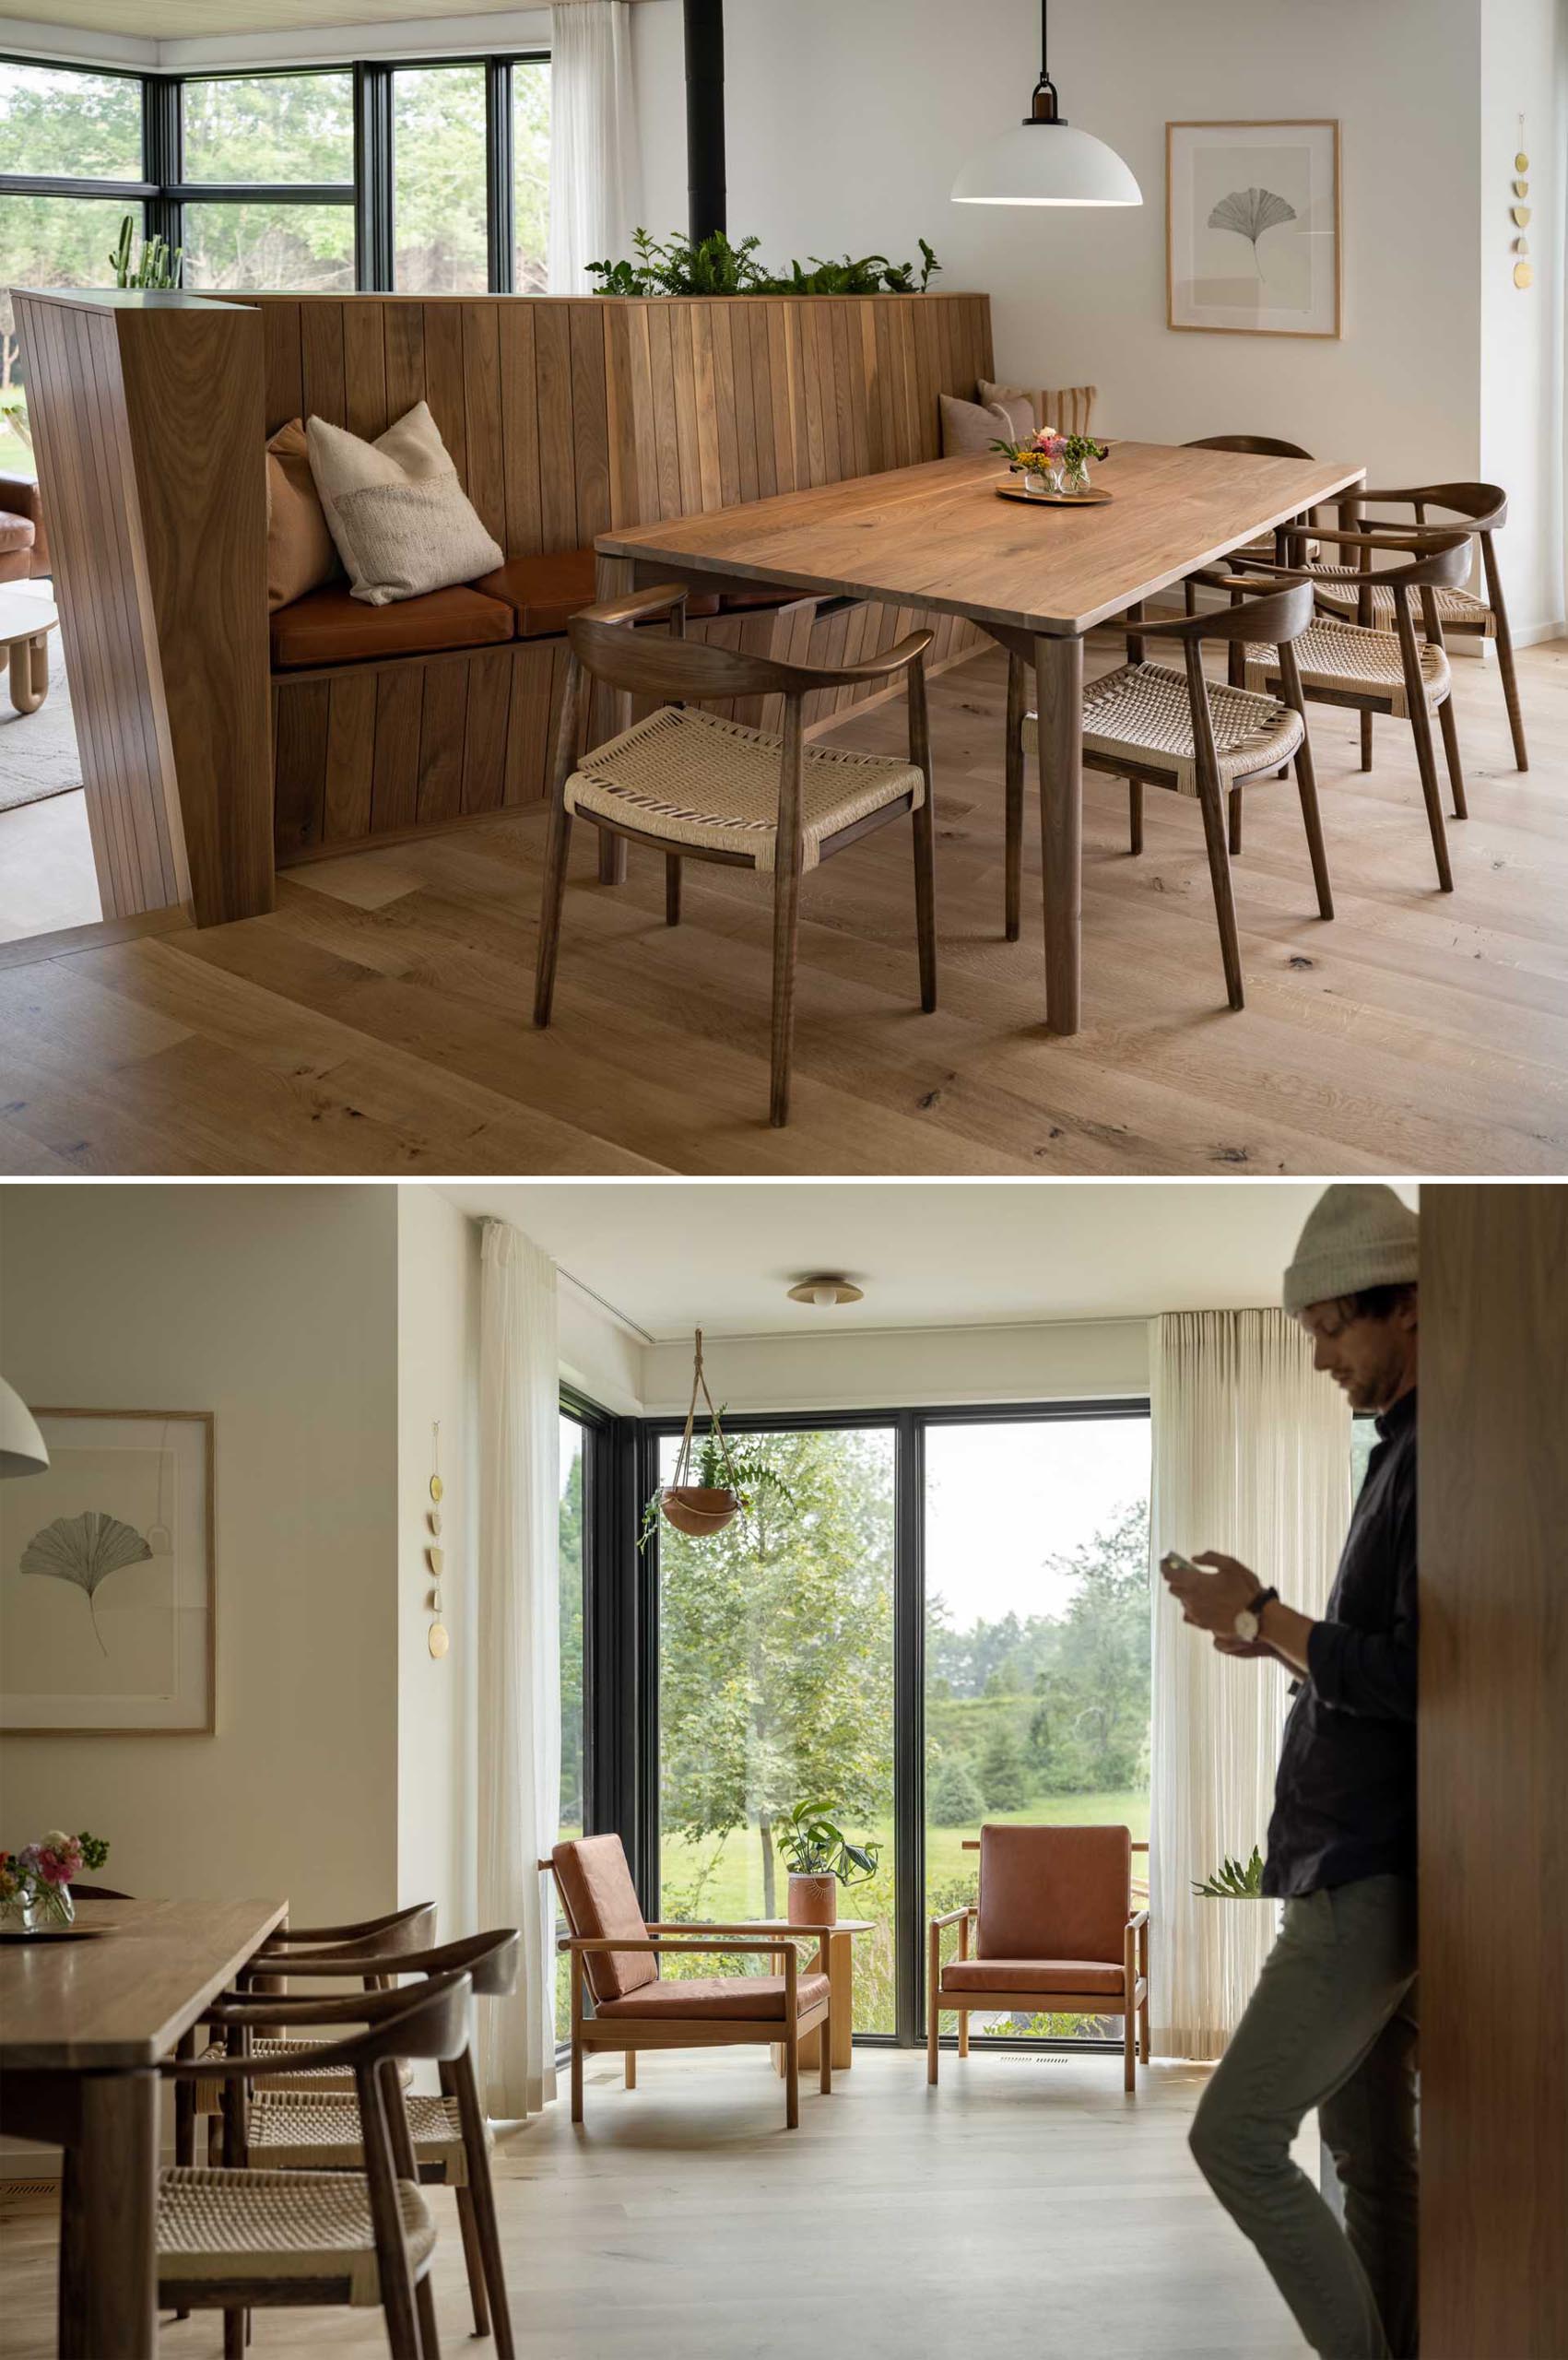 The dining room has a unique design, with a sculptural wood banquette bench that acts as seating for the table. A pair of chairs takes advantage of the window views.